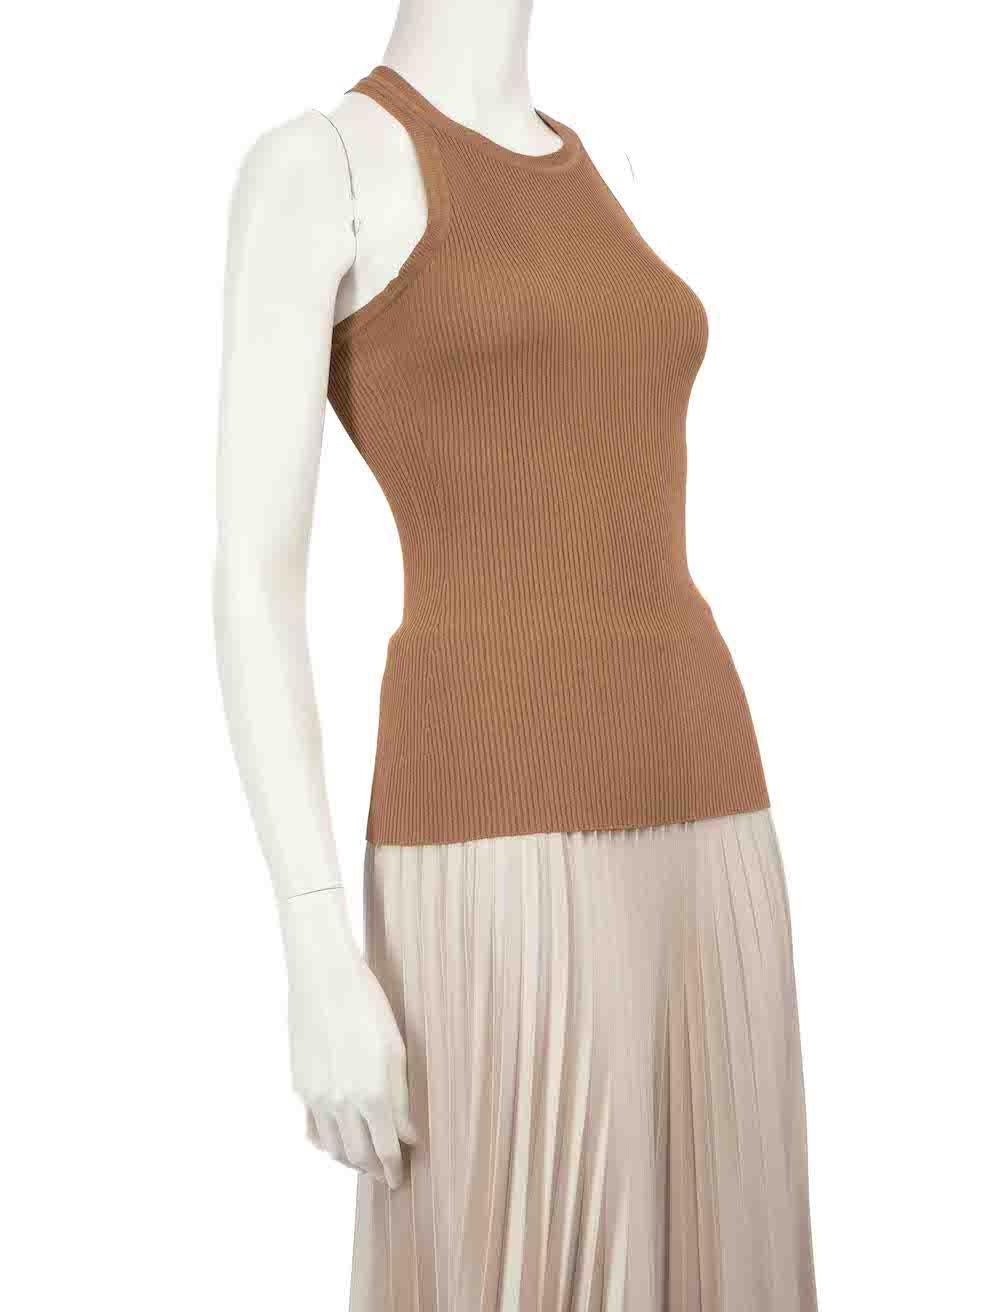 CONDITION is Very good. Minimal wear to top is evident. There are two small marks to the front of the top on this used Max Mara designer resale item.
 
 
 
 Details
 
 
 Brown
 
 Synthetic
 
 Tank top
 
 Sleeveless
 
 Round neckline
 
 Ribbed and